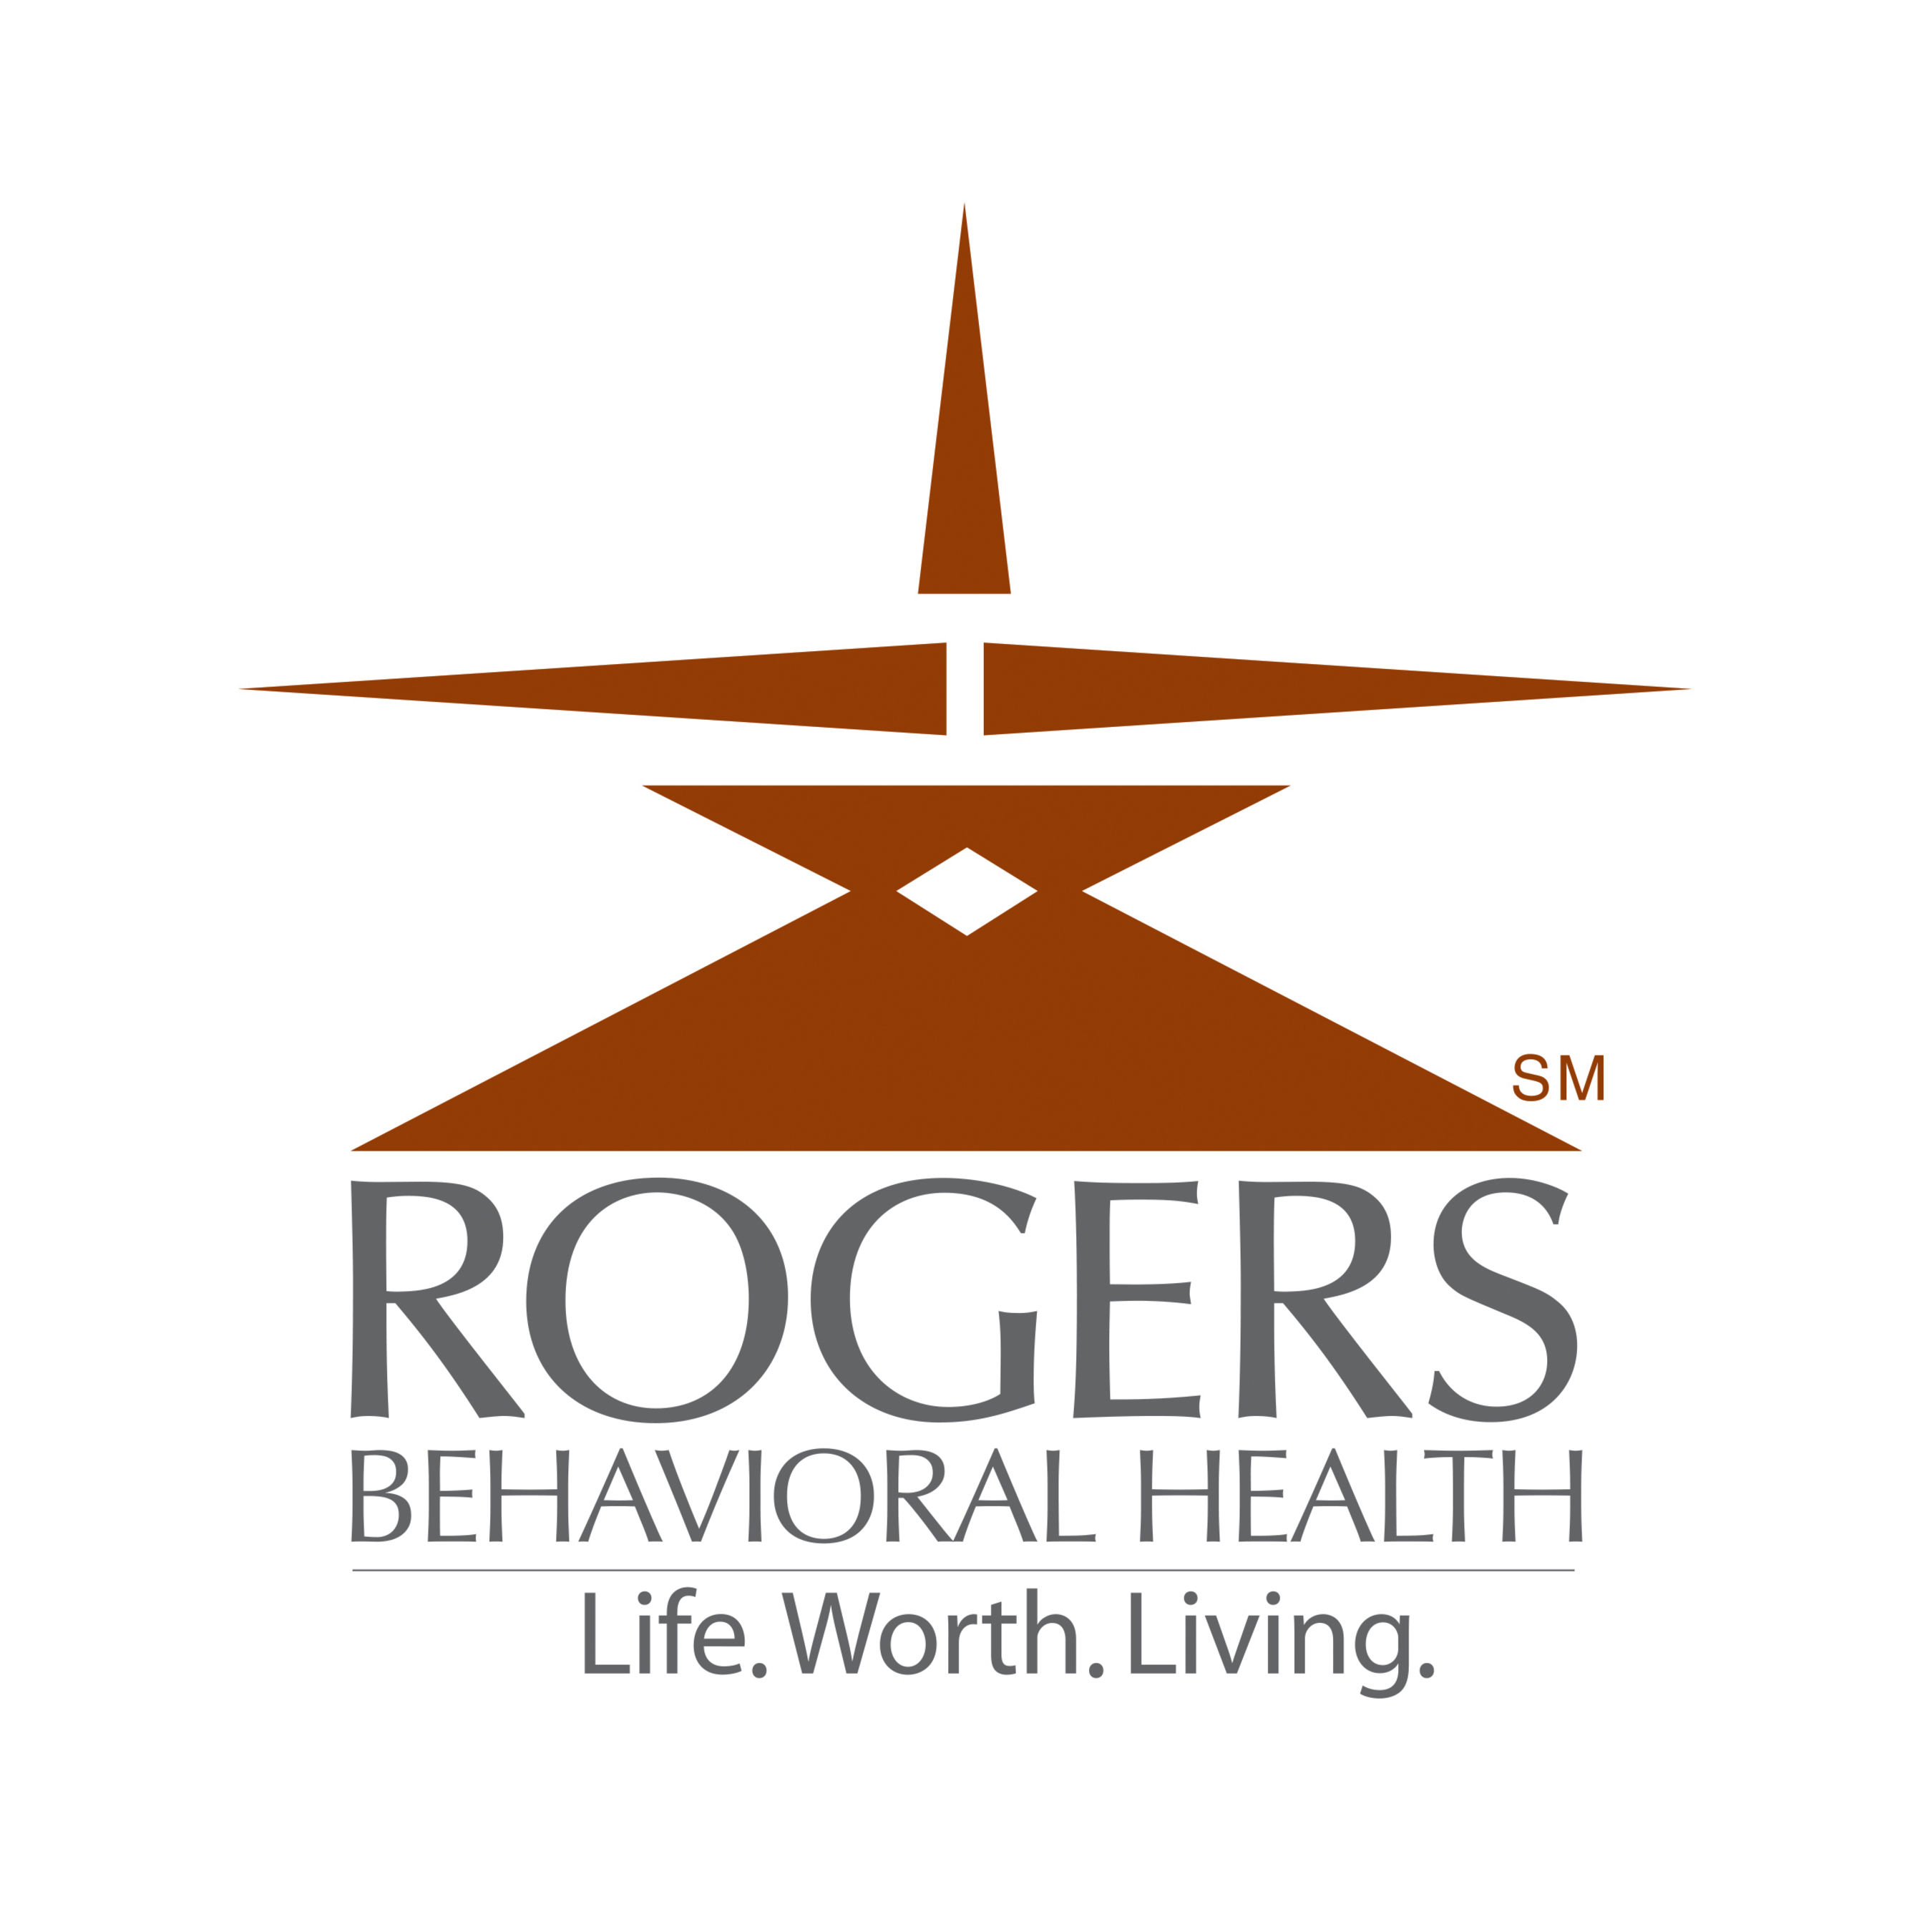 Wisconsin-based Rogers Behavioral Health System is a private, not-for-profit system nationally recognized for its specialized psychiatry and addiction services. Anchored by Rogers Memorial Hospital, Rogers offers multiple levels of evidence-based treatment for adults, children and adolescents with depression and mood disorders, eating disorders, addiction, obsessive-compulsive and anxiety disorders, and posttraumatic stress disorder in multiple locations. For more information, visit www.rogershospital.org